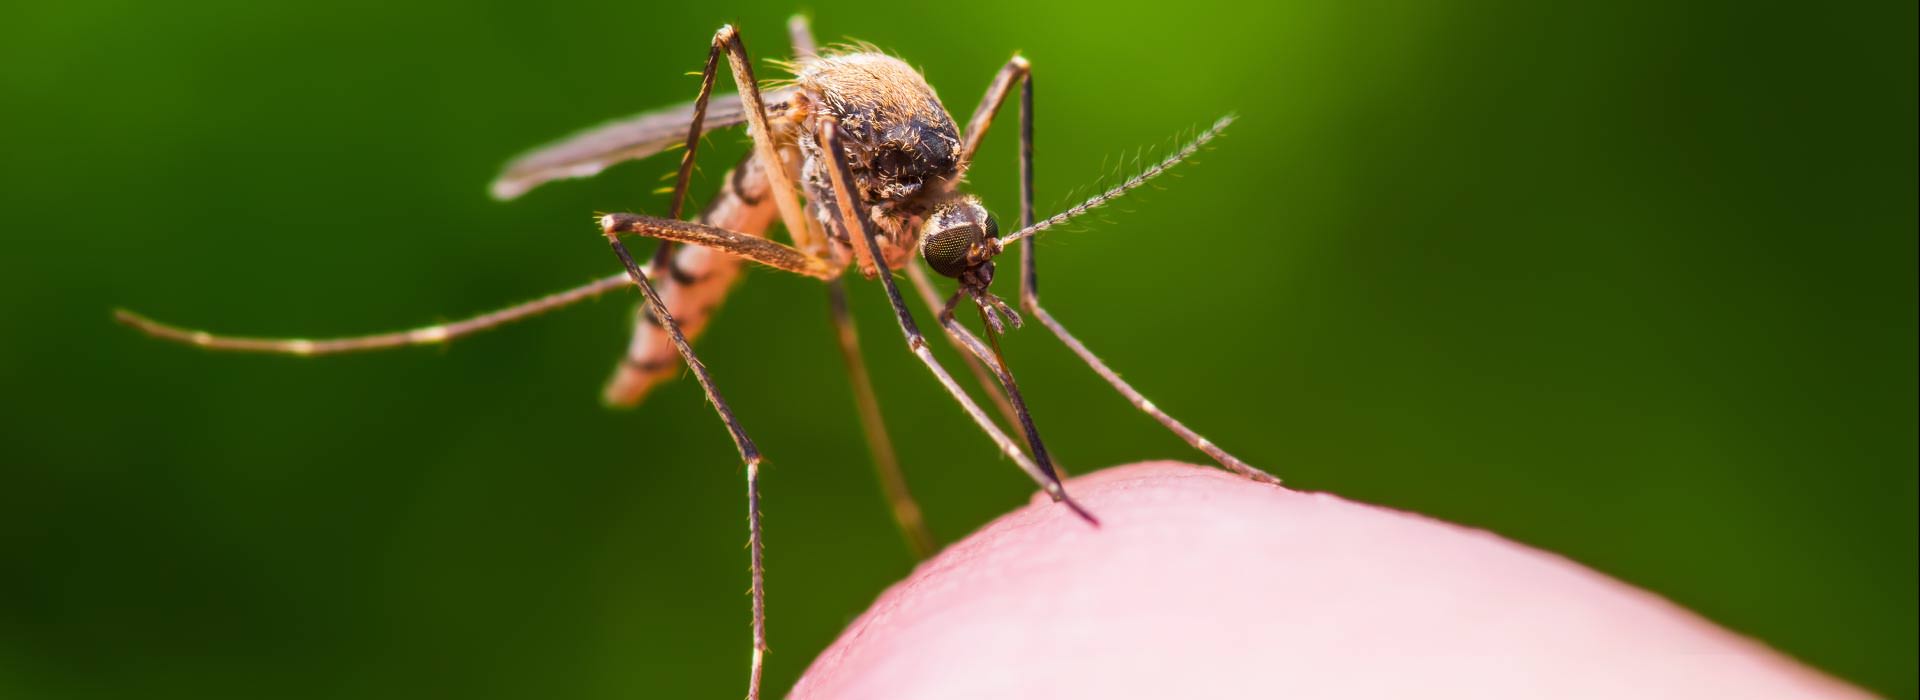 Close-up shot of a mosquito